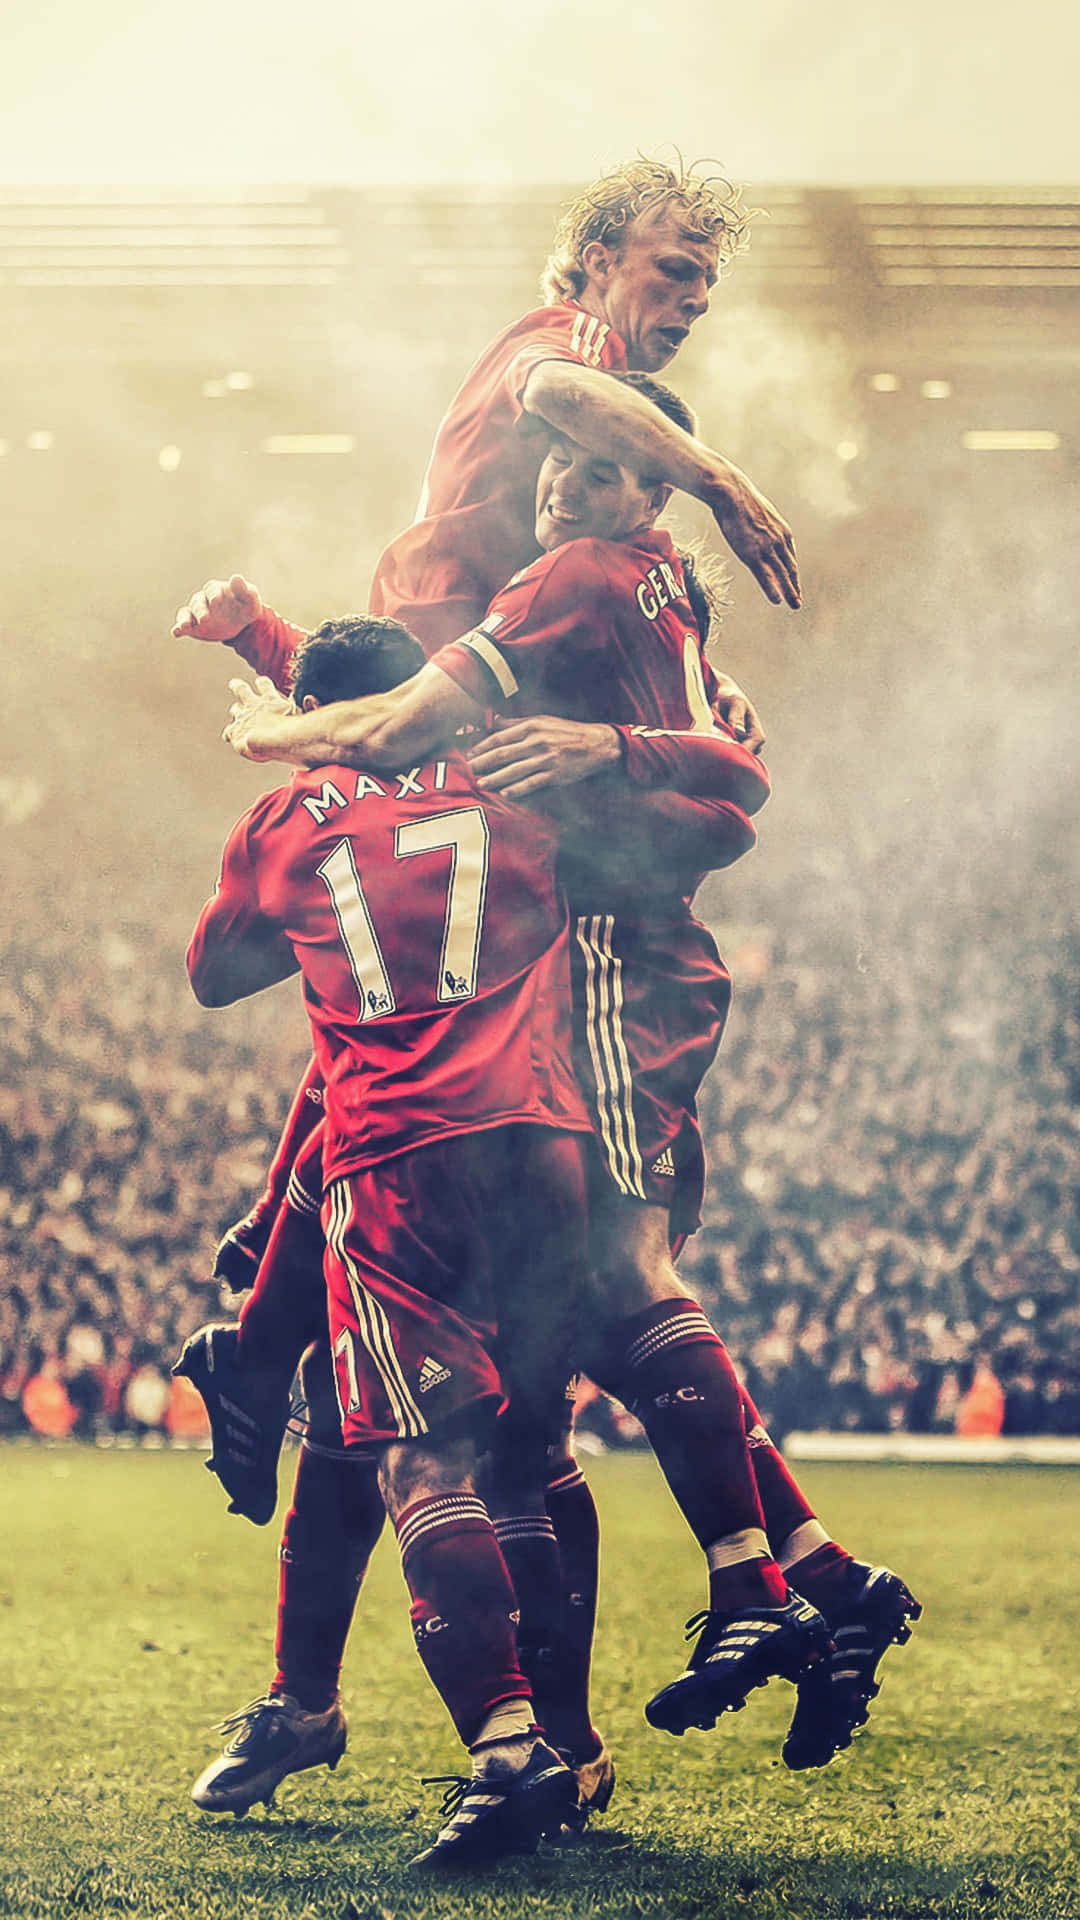 Check Out This Epic Liverpool Iphone Wallpaper! Wallpaper